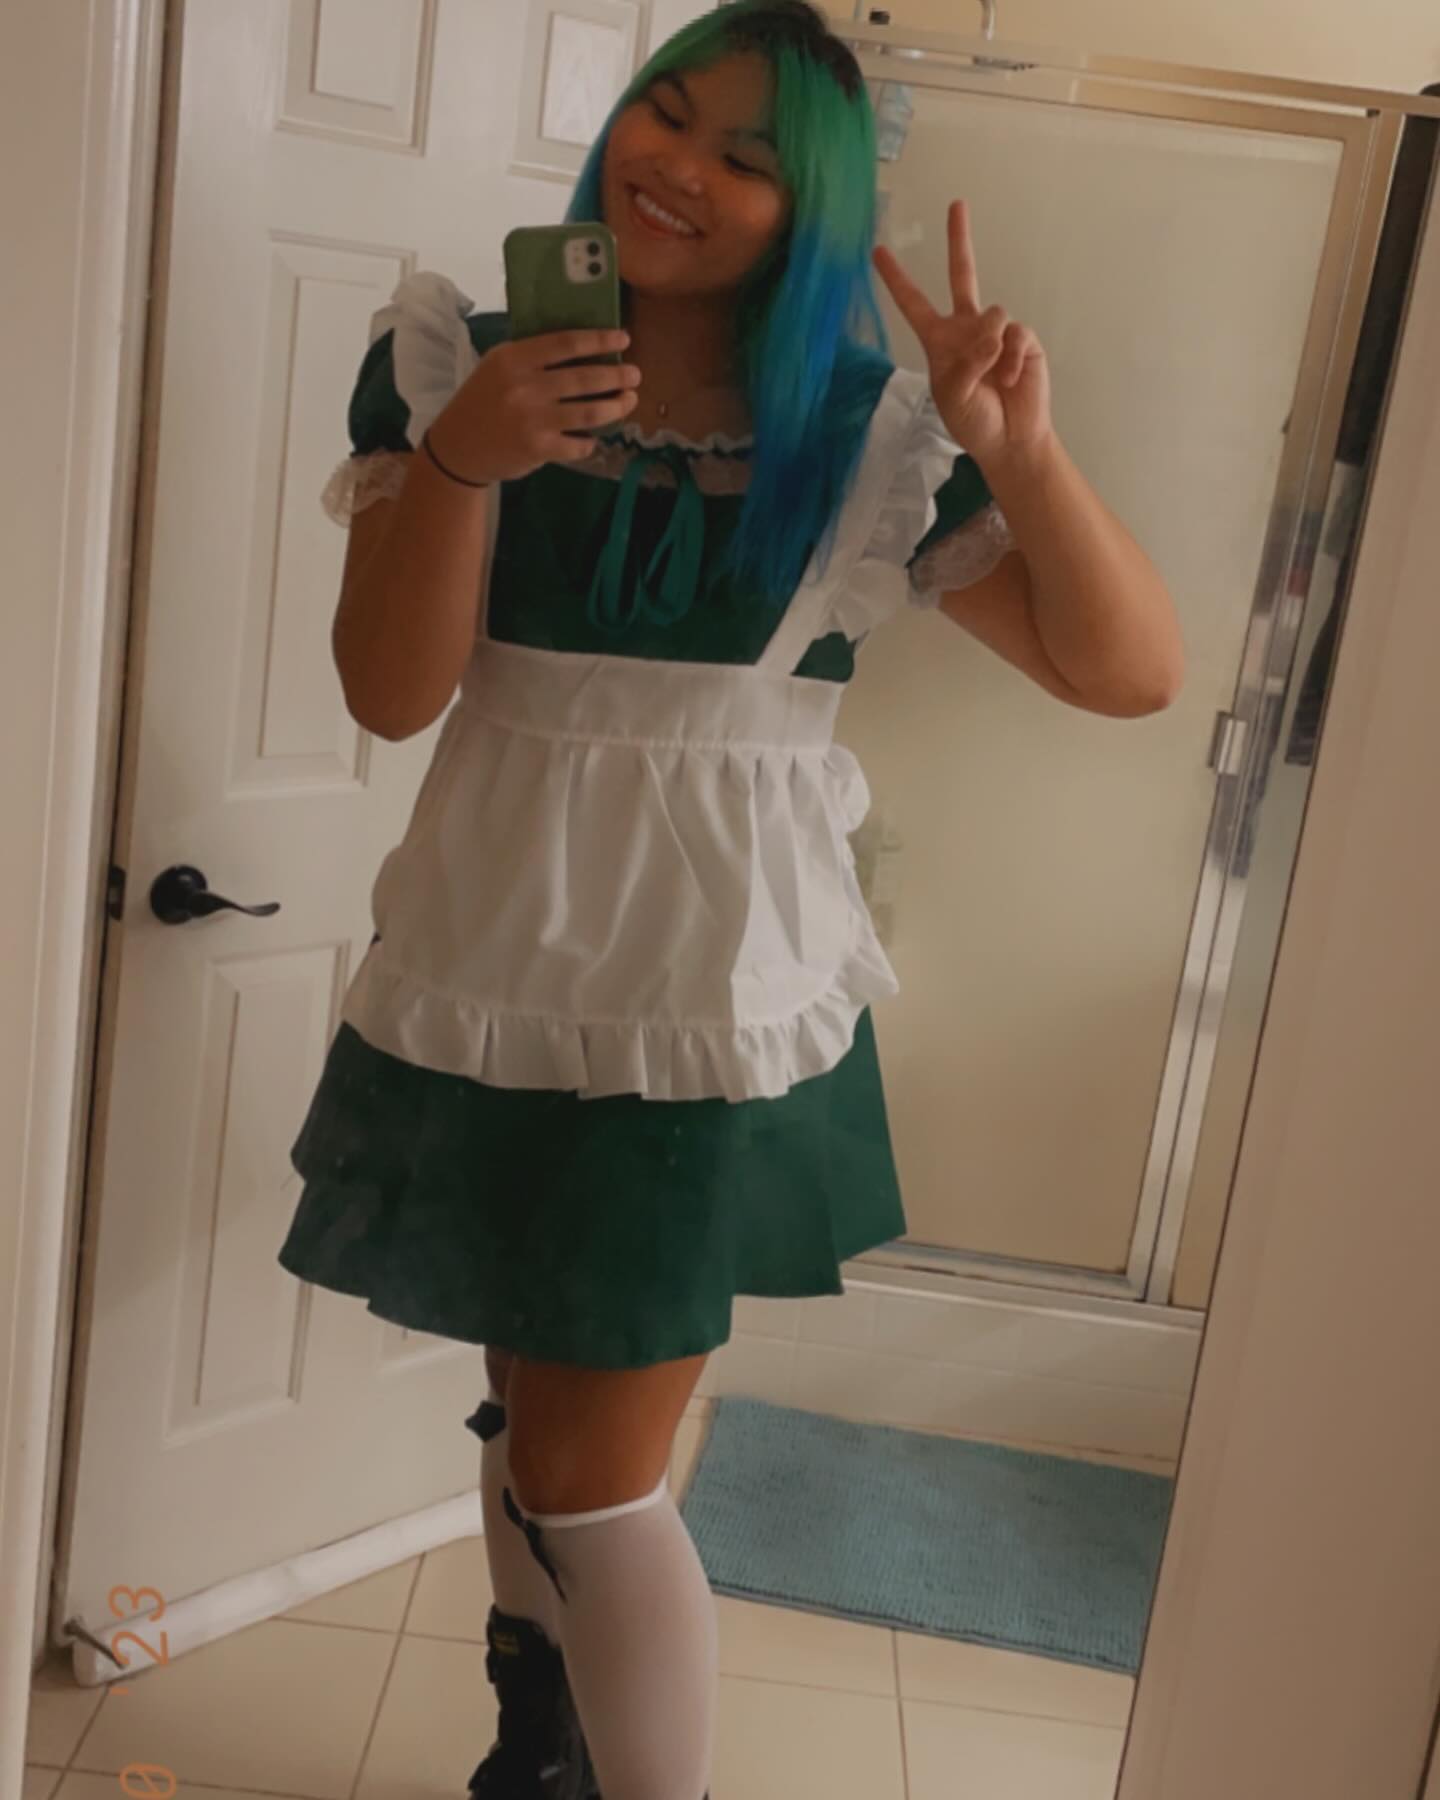 Your Greenest Maid is here, at your service!! So, what is your first request?? 🥰💚✨

Tags:

#maid #maidcosplay #maidcore #maidoutfit #maiddress #mirrorselfie #mirror #mirrorpic #happygirl #kneesocks #cosplay #cosplaygirl #filipina